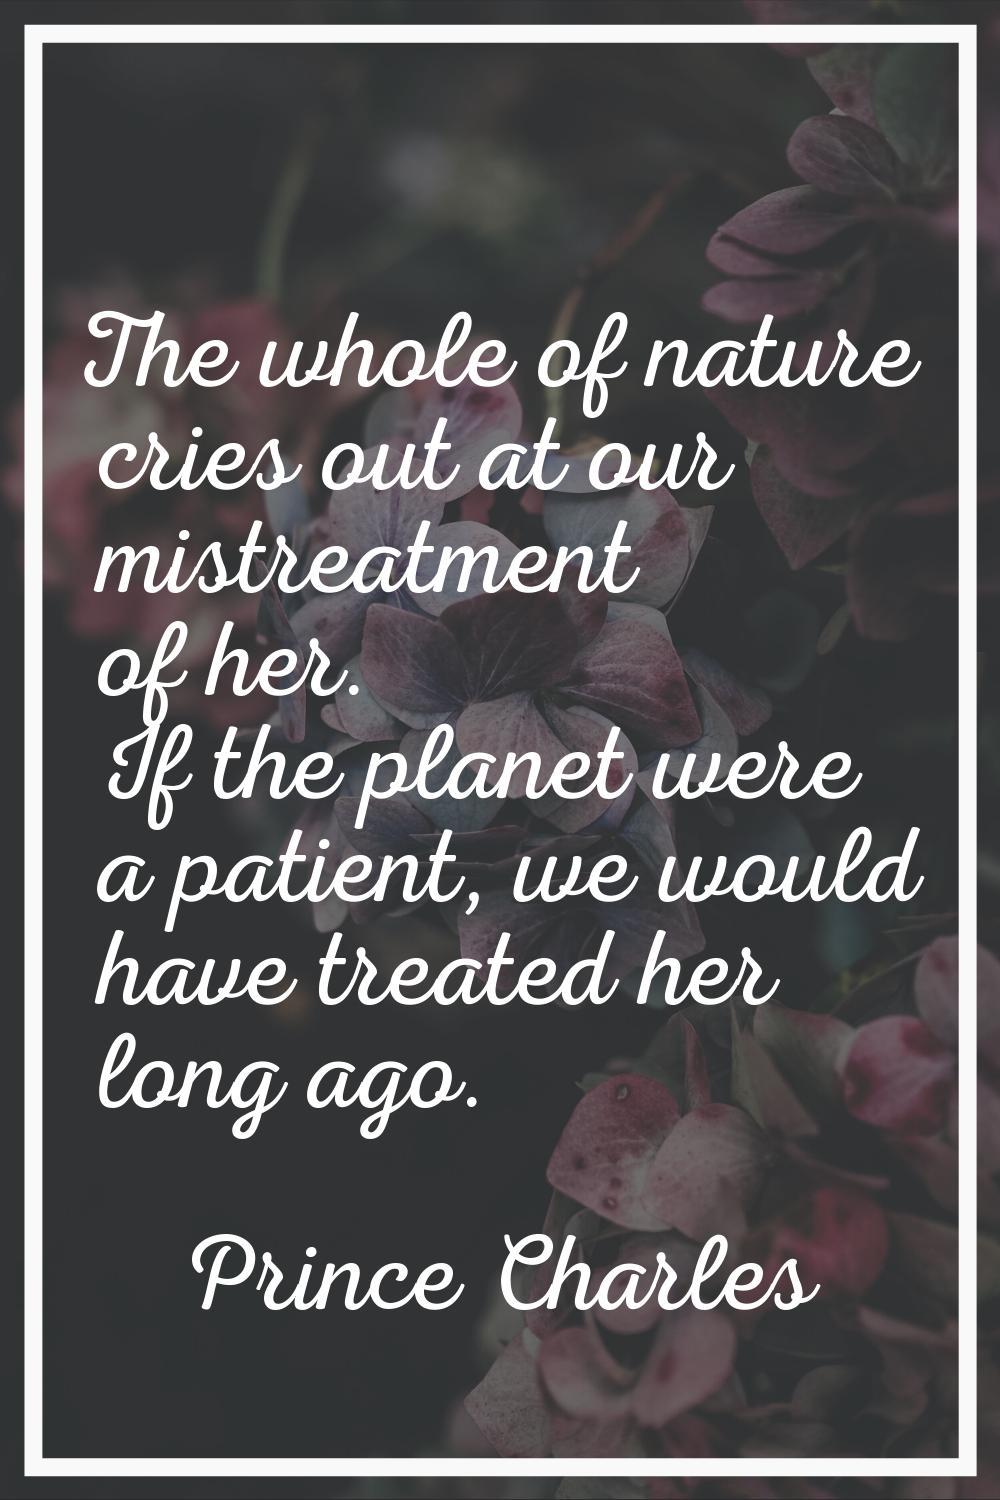 The whole of nature cries out at our mistreatment of her. If the planet were a patient, we would ha